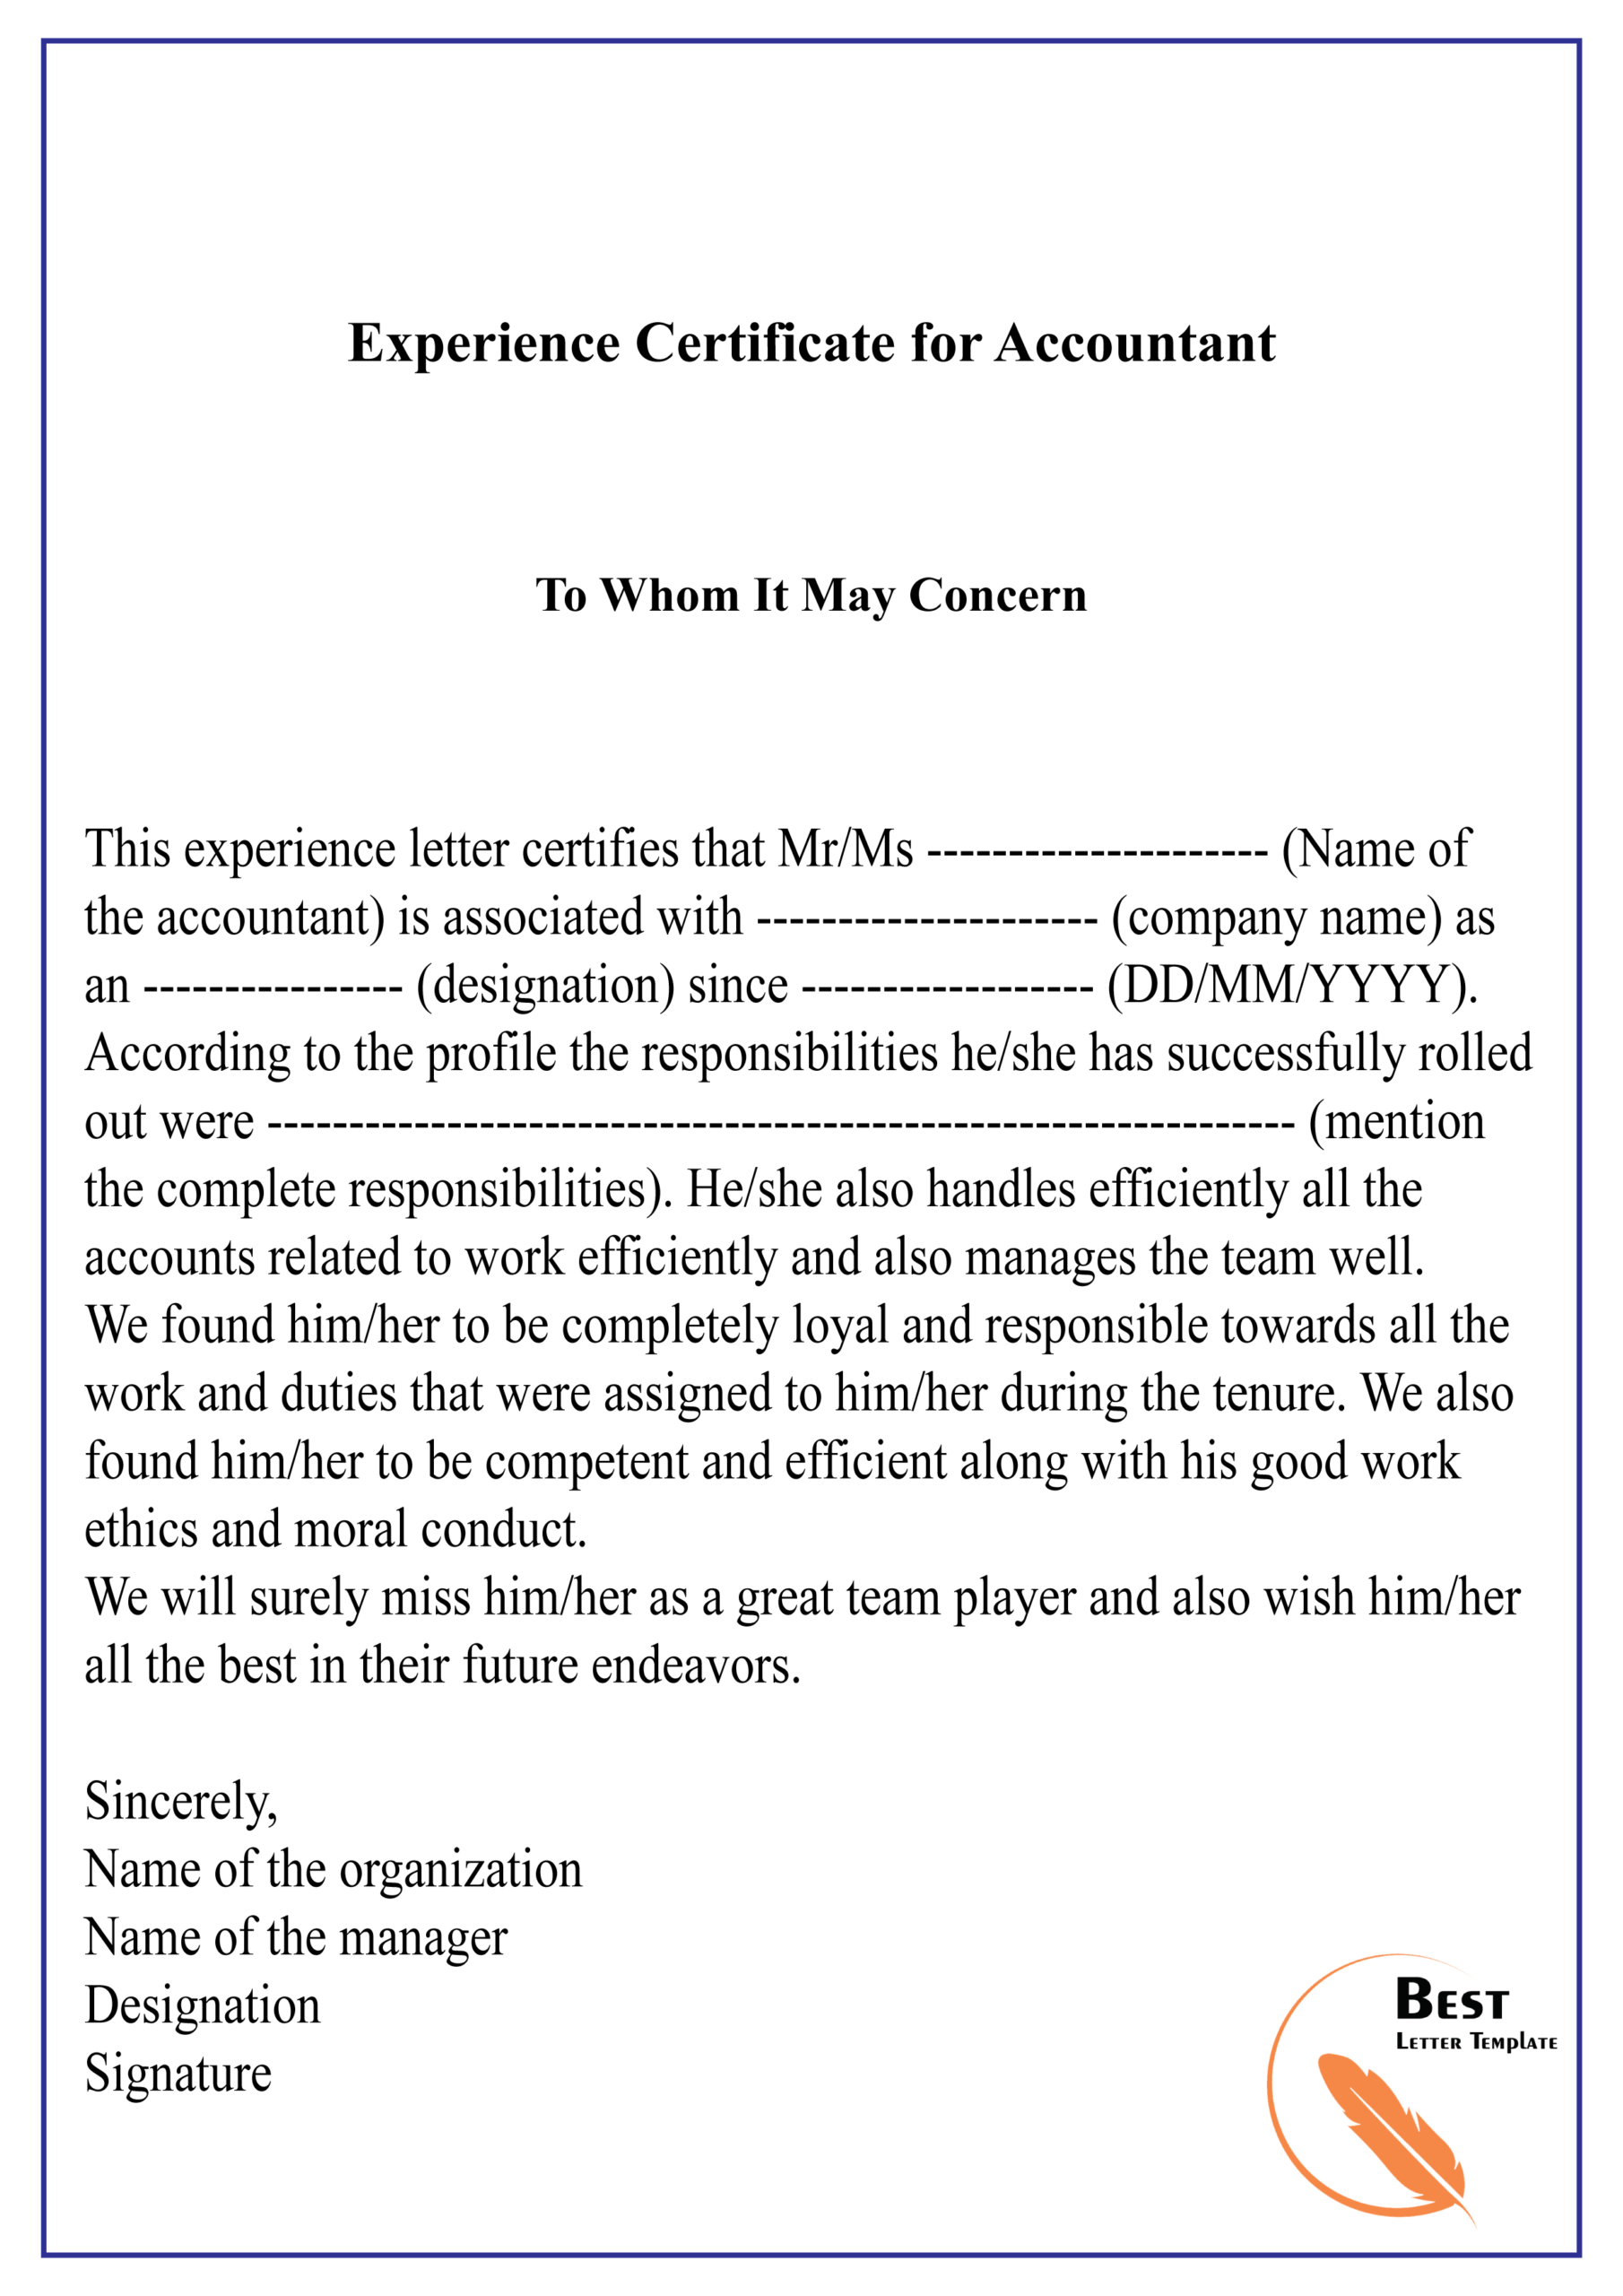 Experience Certificate For Accountant 01 | Best Letter Template With Template Of Experience Certificate